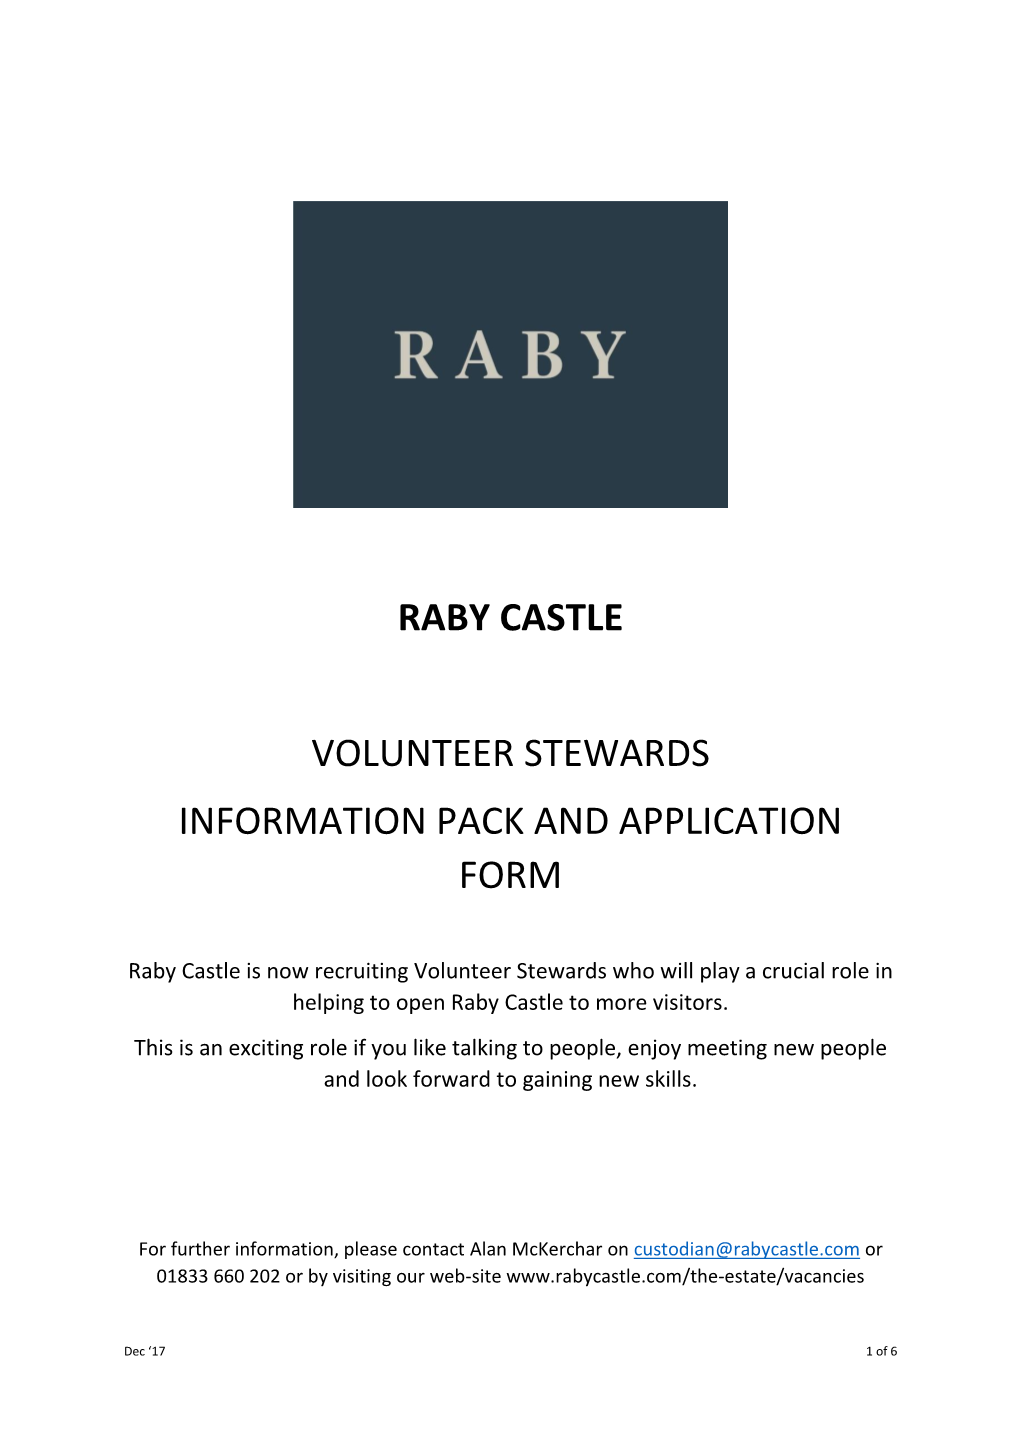 Raby Castle Volunteer Stewards Information Pack and Application Form